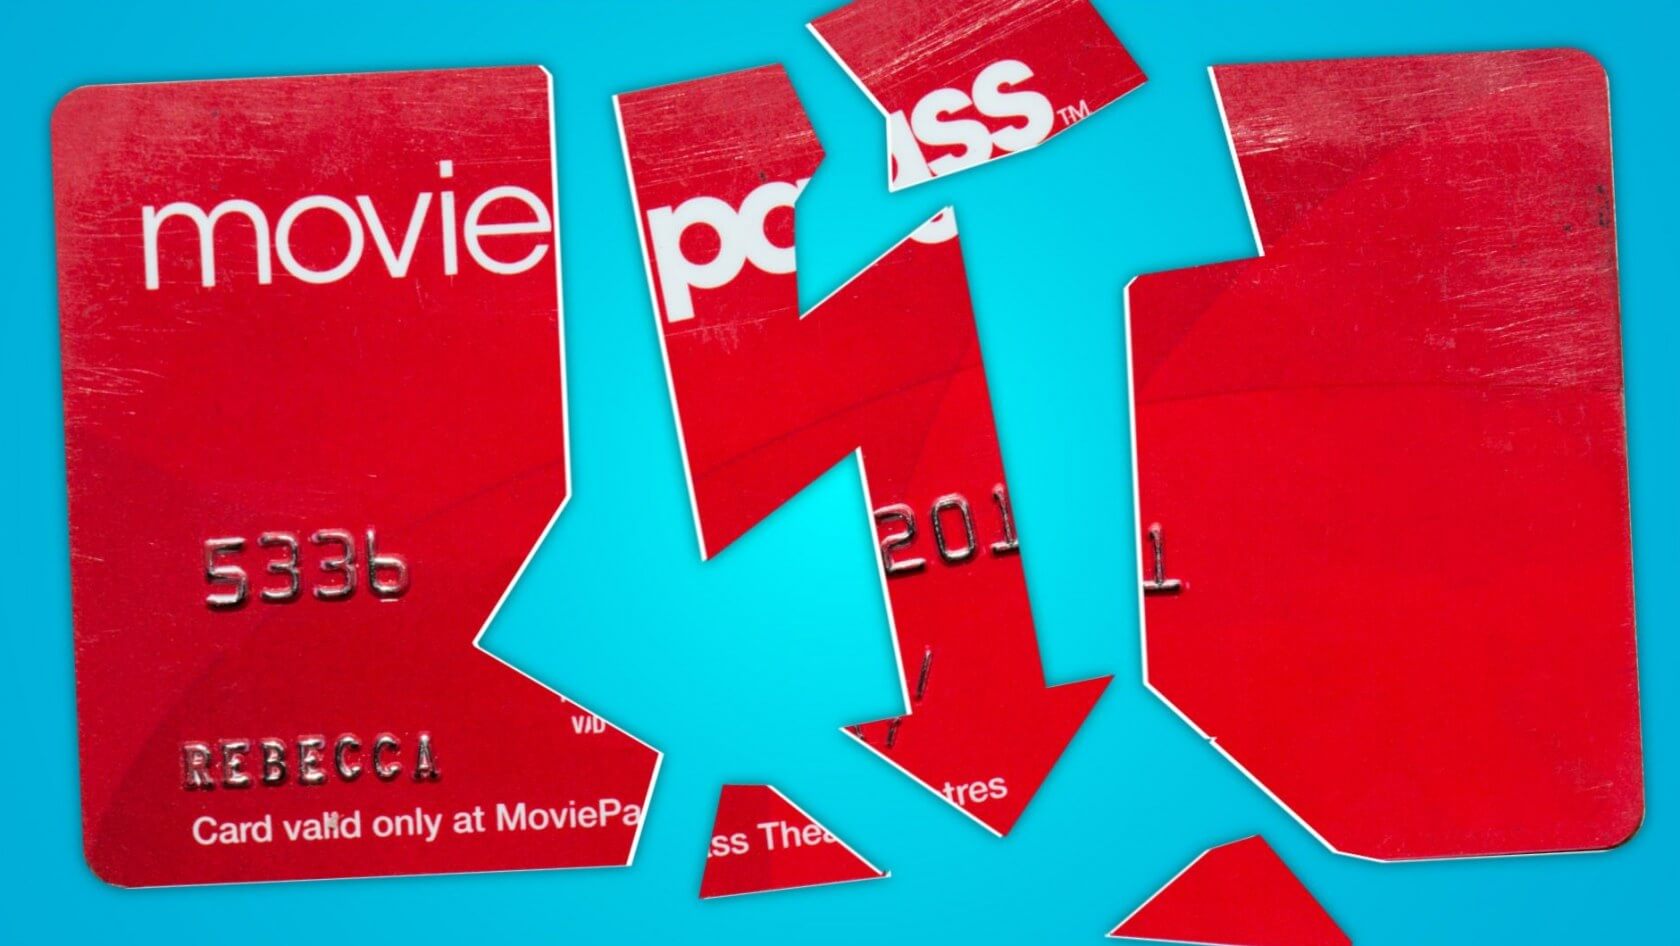 MoviePass hopes to right the ship by launching three new subscription tiers in 2019